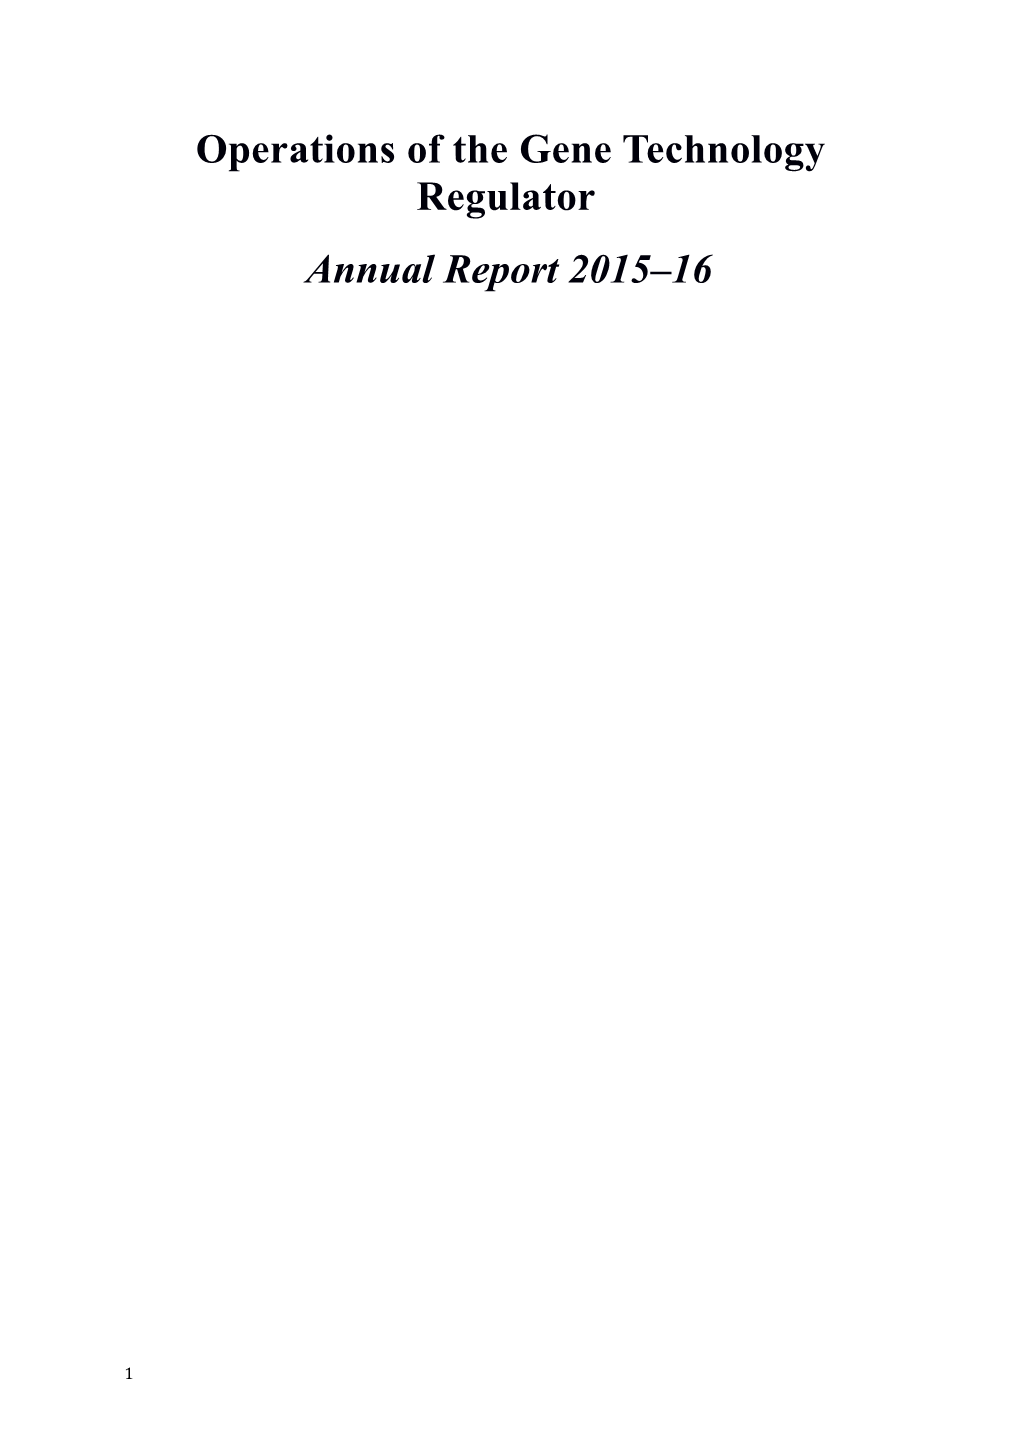 Operations of the Gene Technology Regulator Annual Report 2015-16